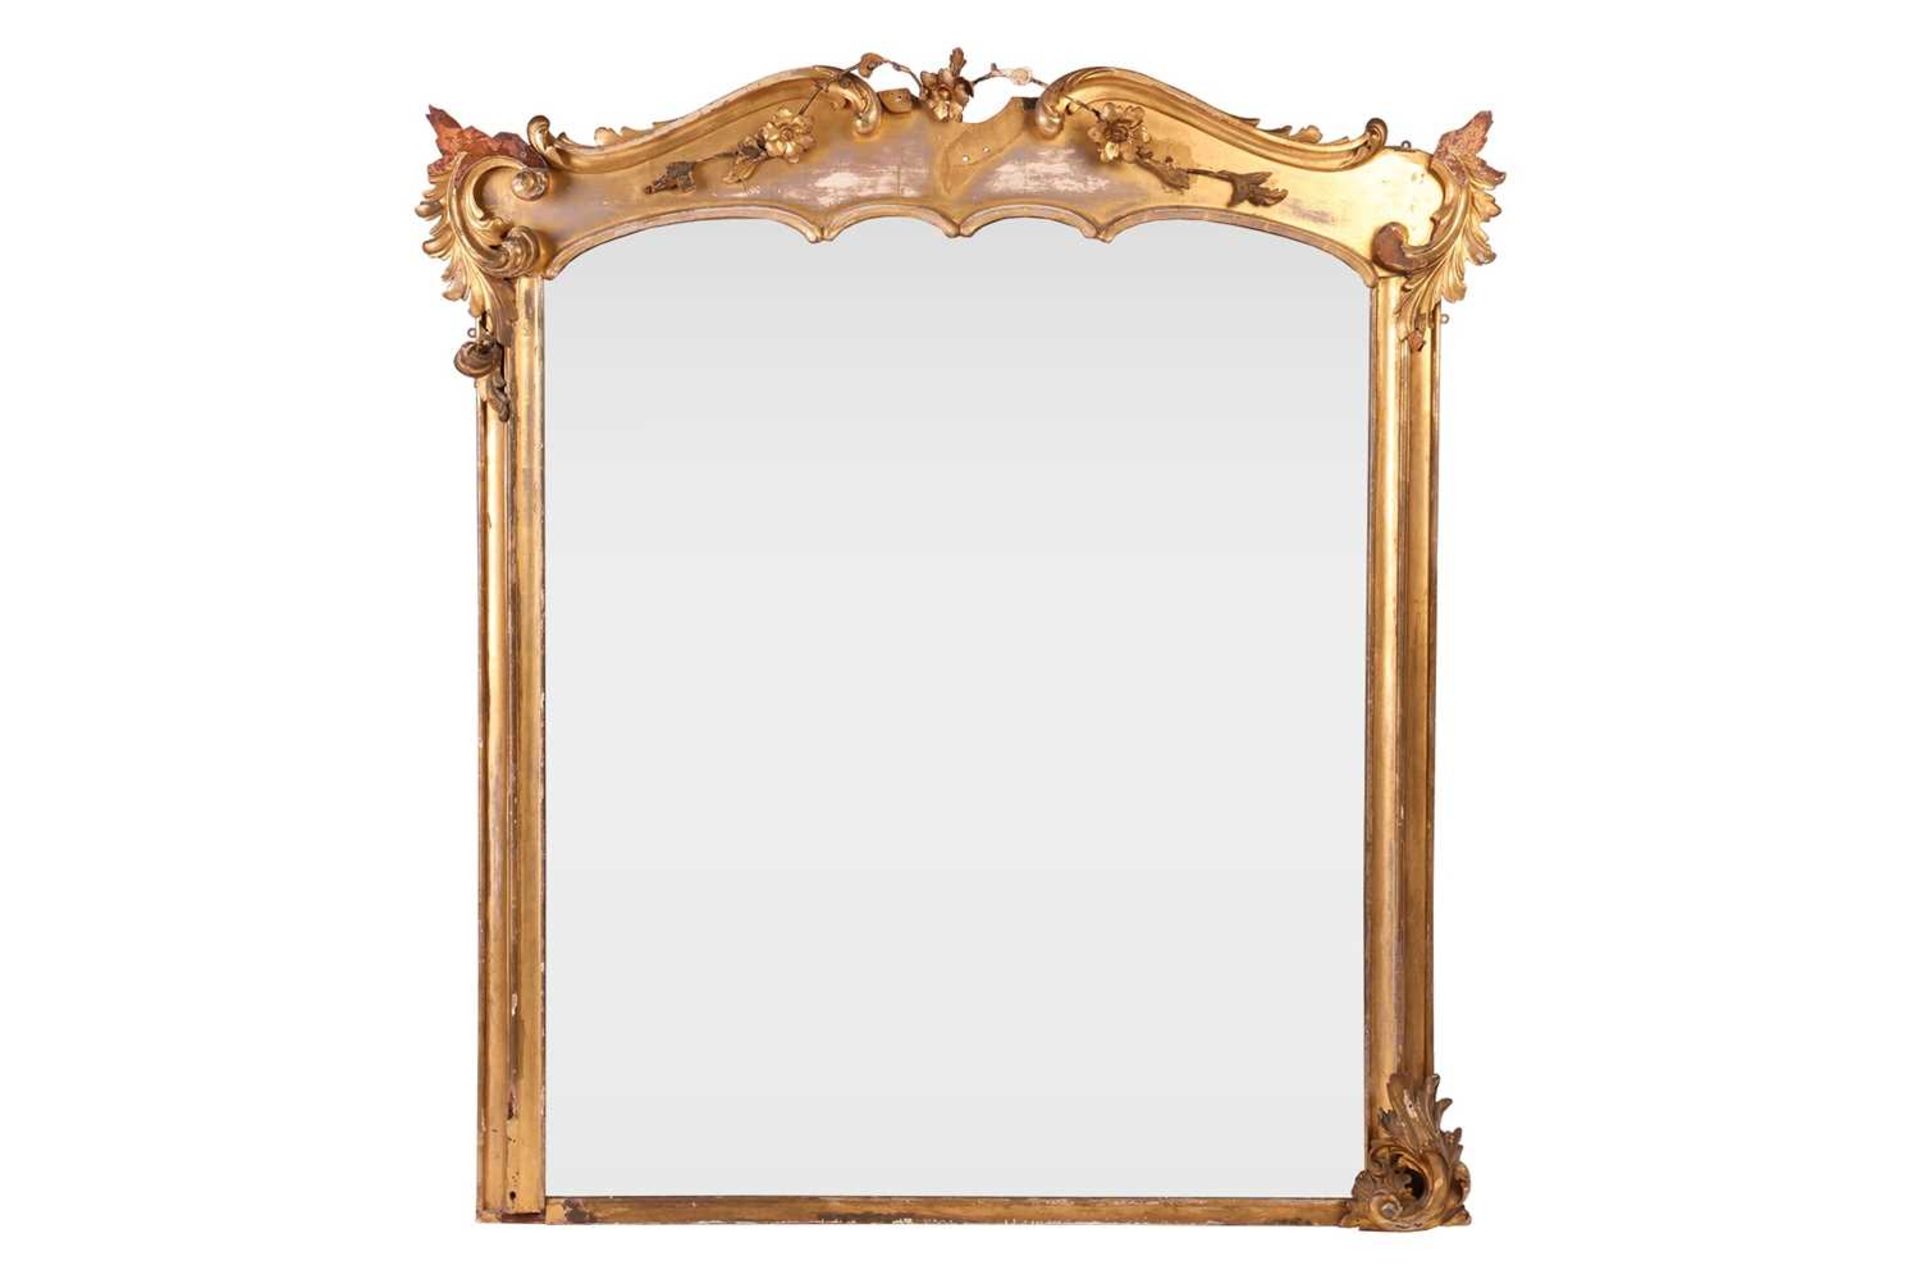 A 19th century giltwood overmantel mirror, the shaped top with applied floral sprays, foliate scroll